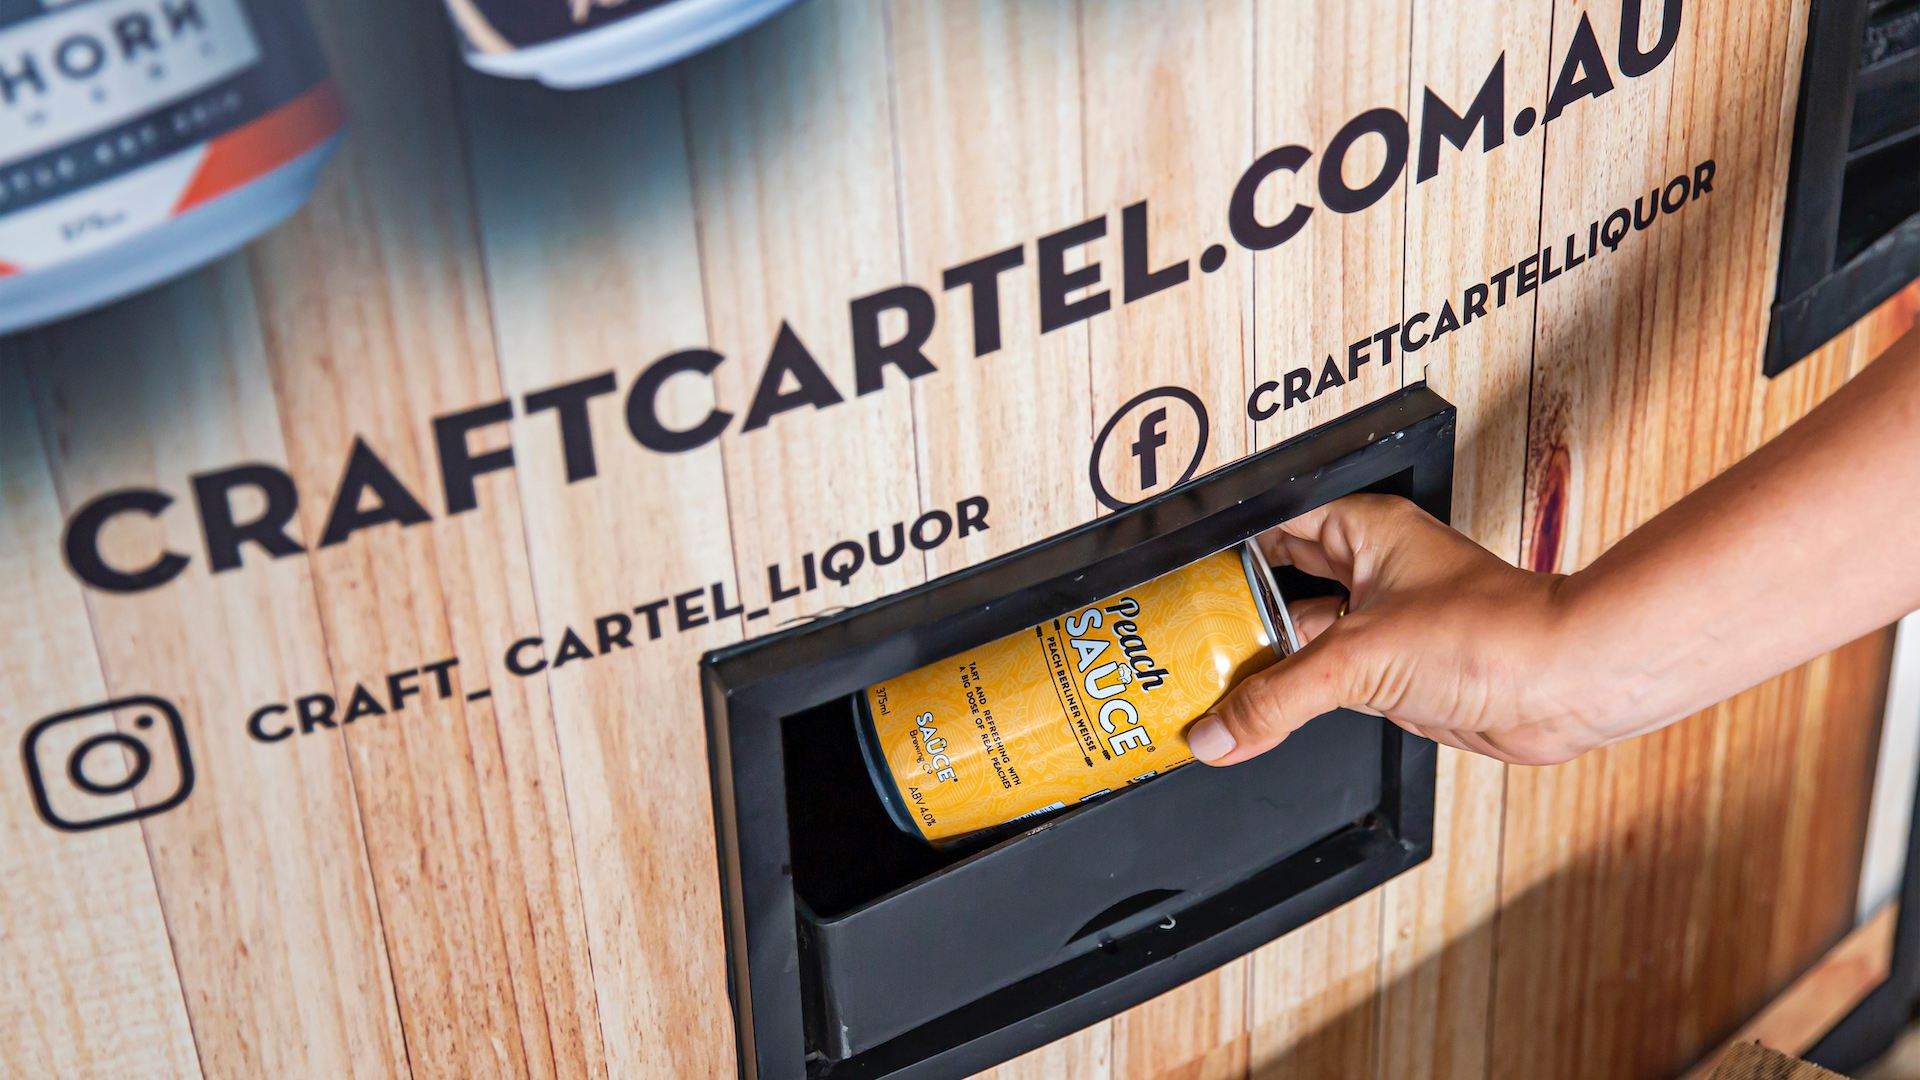 This Indulgent New Booze Membership Includes an Entire Beer Vending Machine and a Year of Refills